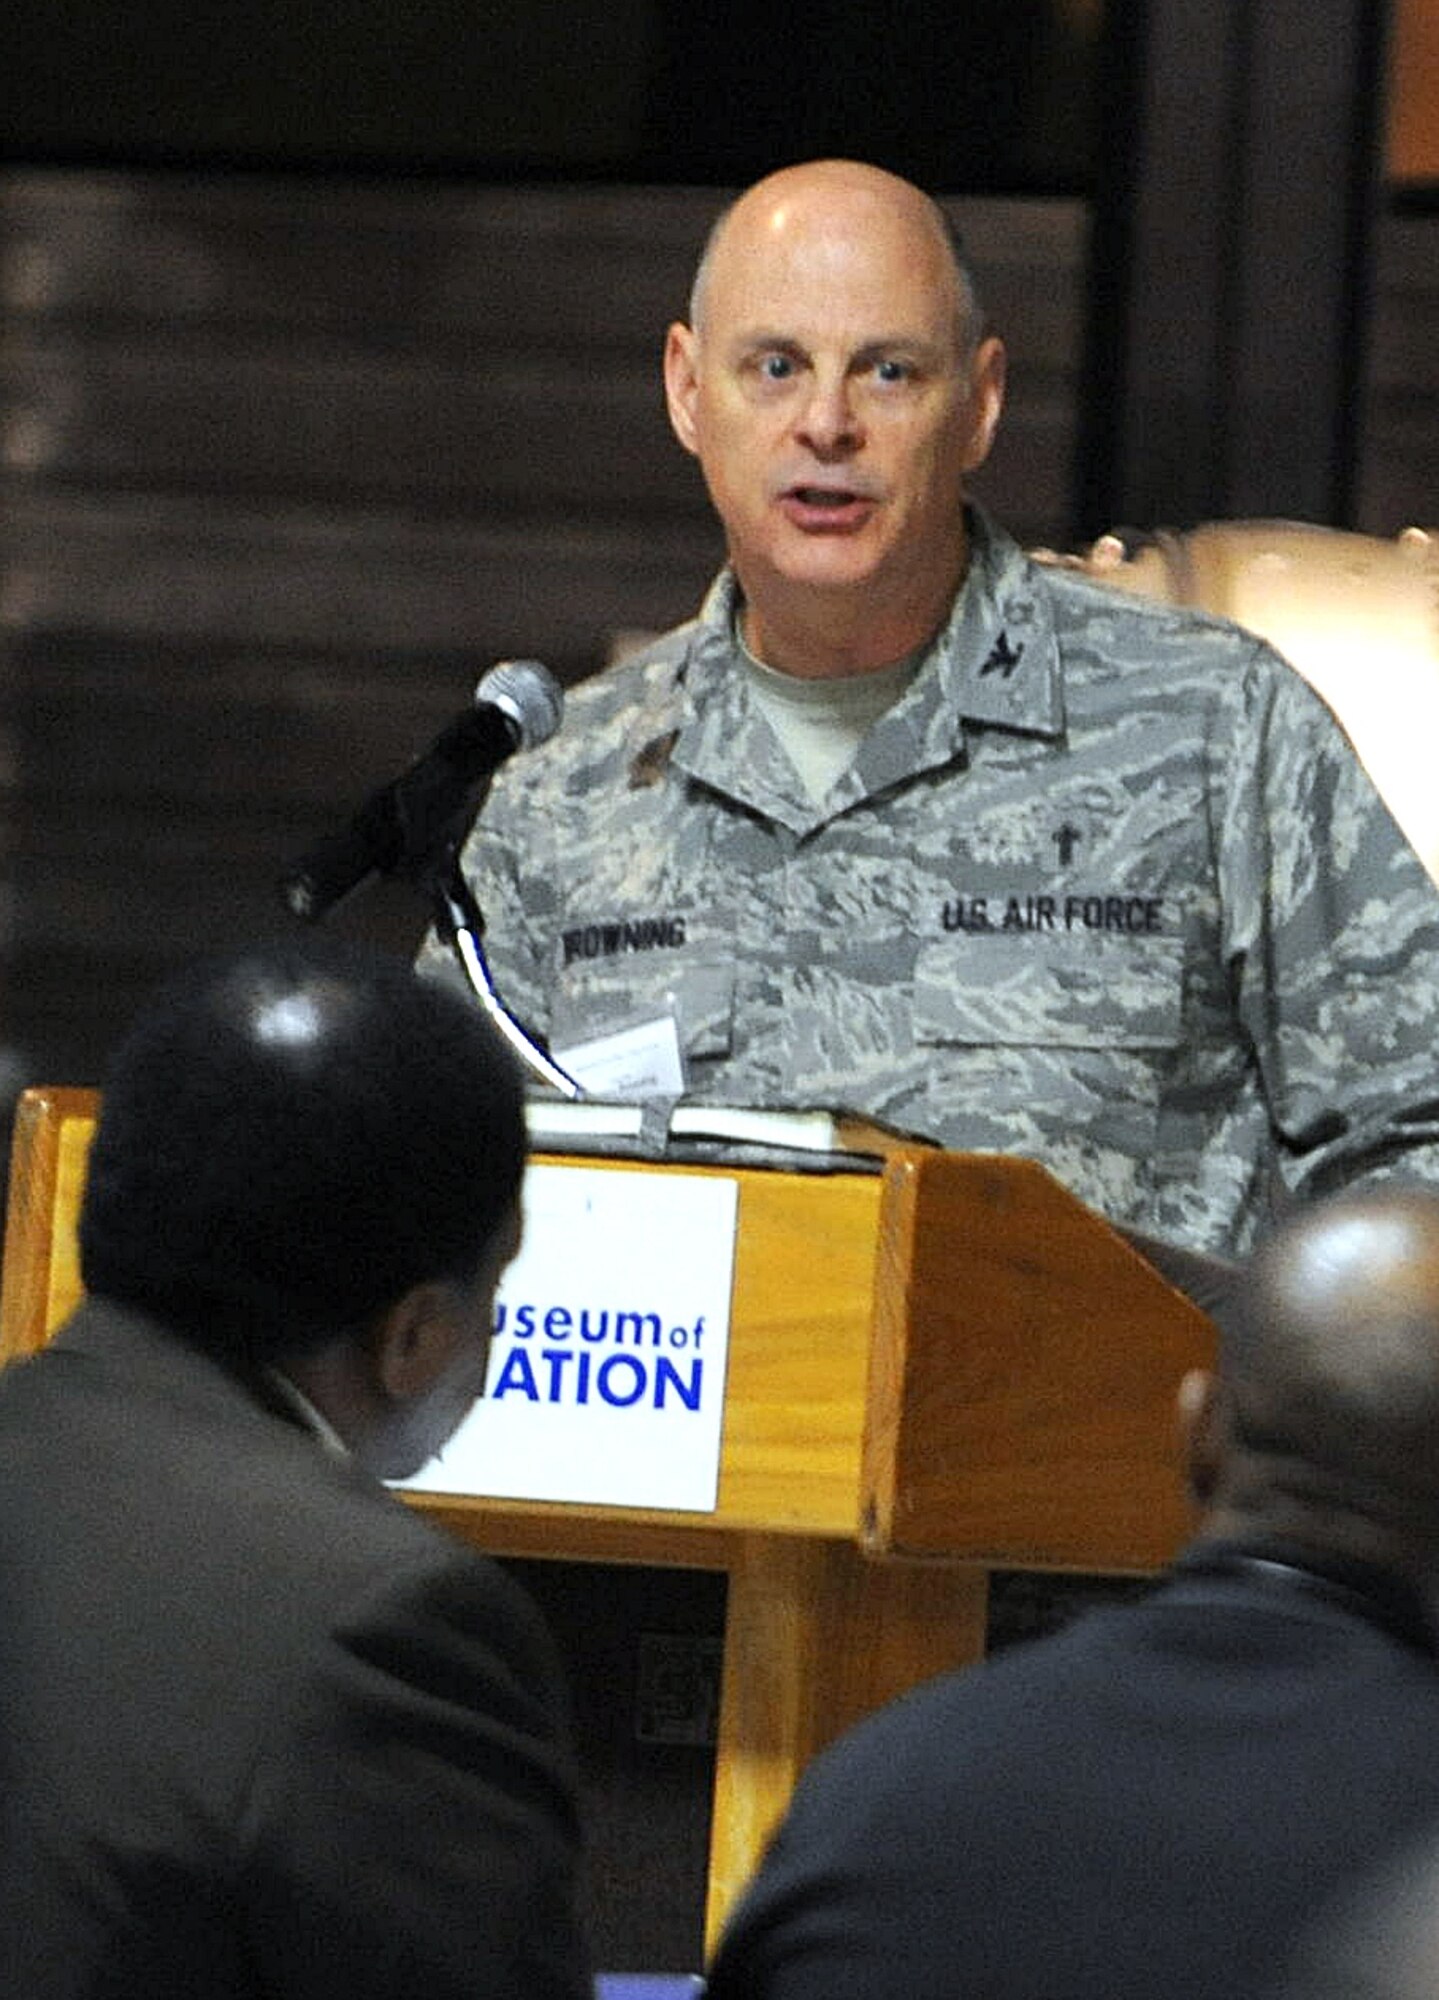 Chaplain (Col.) Jimmy Browning, Air Force Materiel Command chaplain, provided an abbreviated definition of spiritual fitness, relating it those civilian Airmen who work on military aircraft Feb 26, 2015. (U.S. Air Force photo by Tommie Horton)